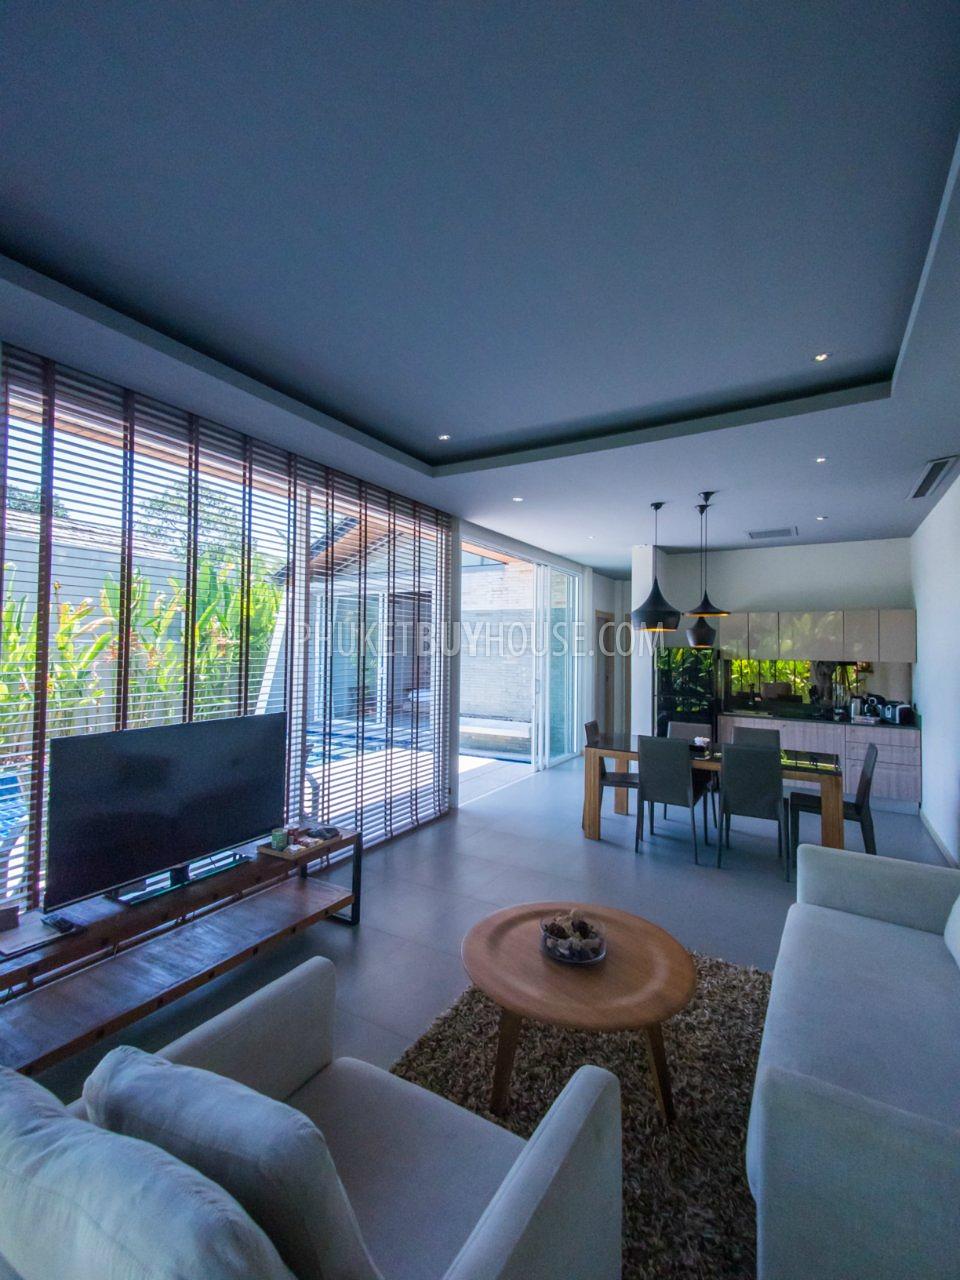 LAY4522: Tropical modern villa with 2 bedrooms in Layan. Photo #35